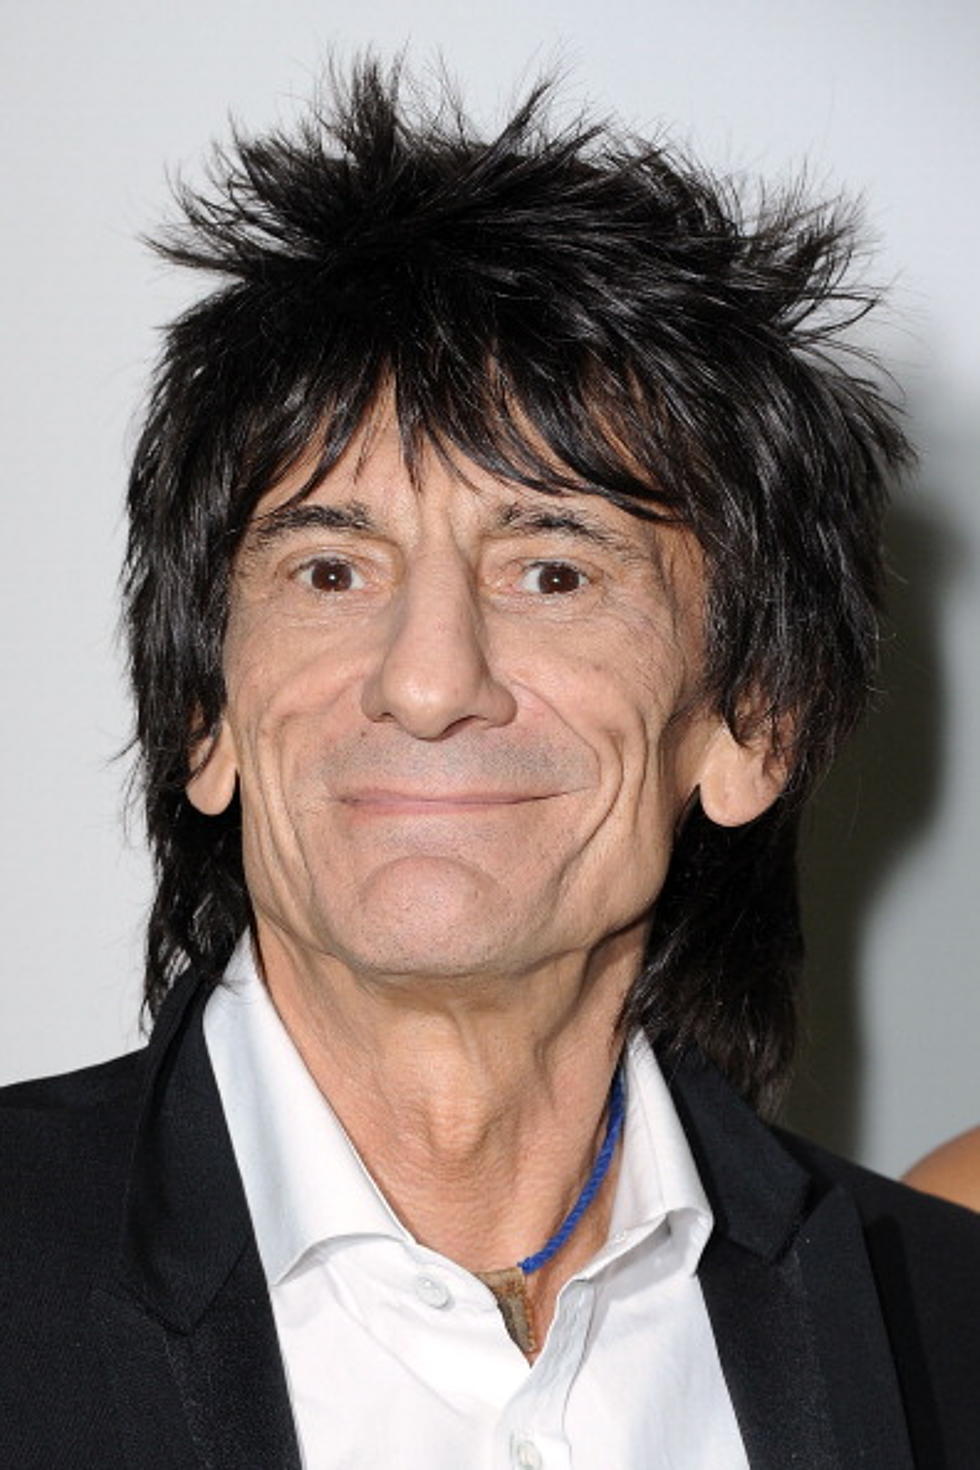 Ronnie Wood Donates Artwork To Children’s Cancer Charity